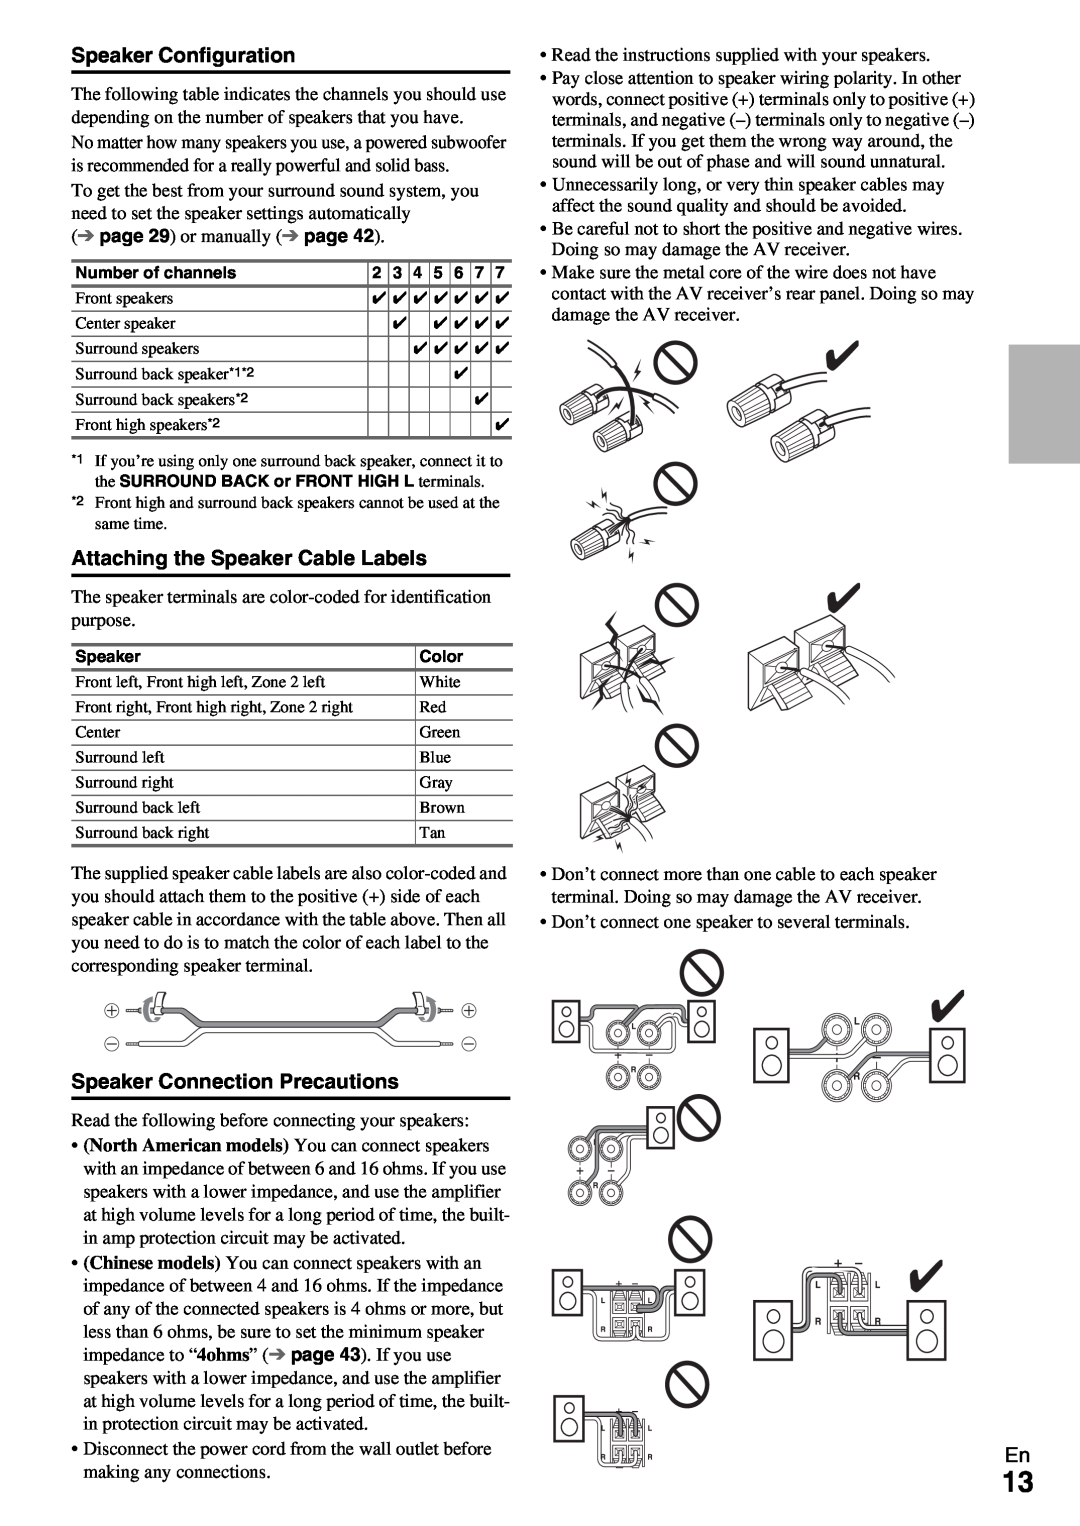 Onkyo HT-RC360 instruction manual Speaker Configuration, Attaching the Speaker Cable Labels, Speaker Connection Precautions 